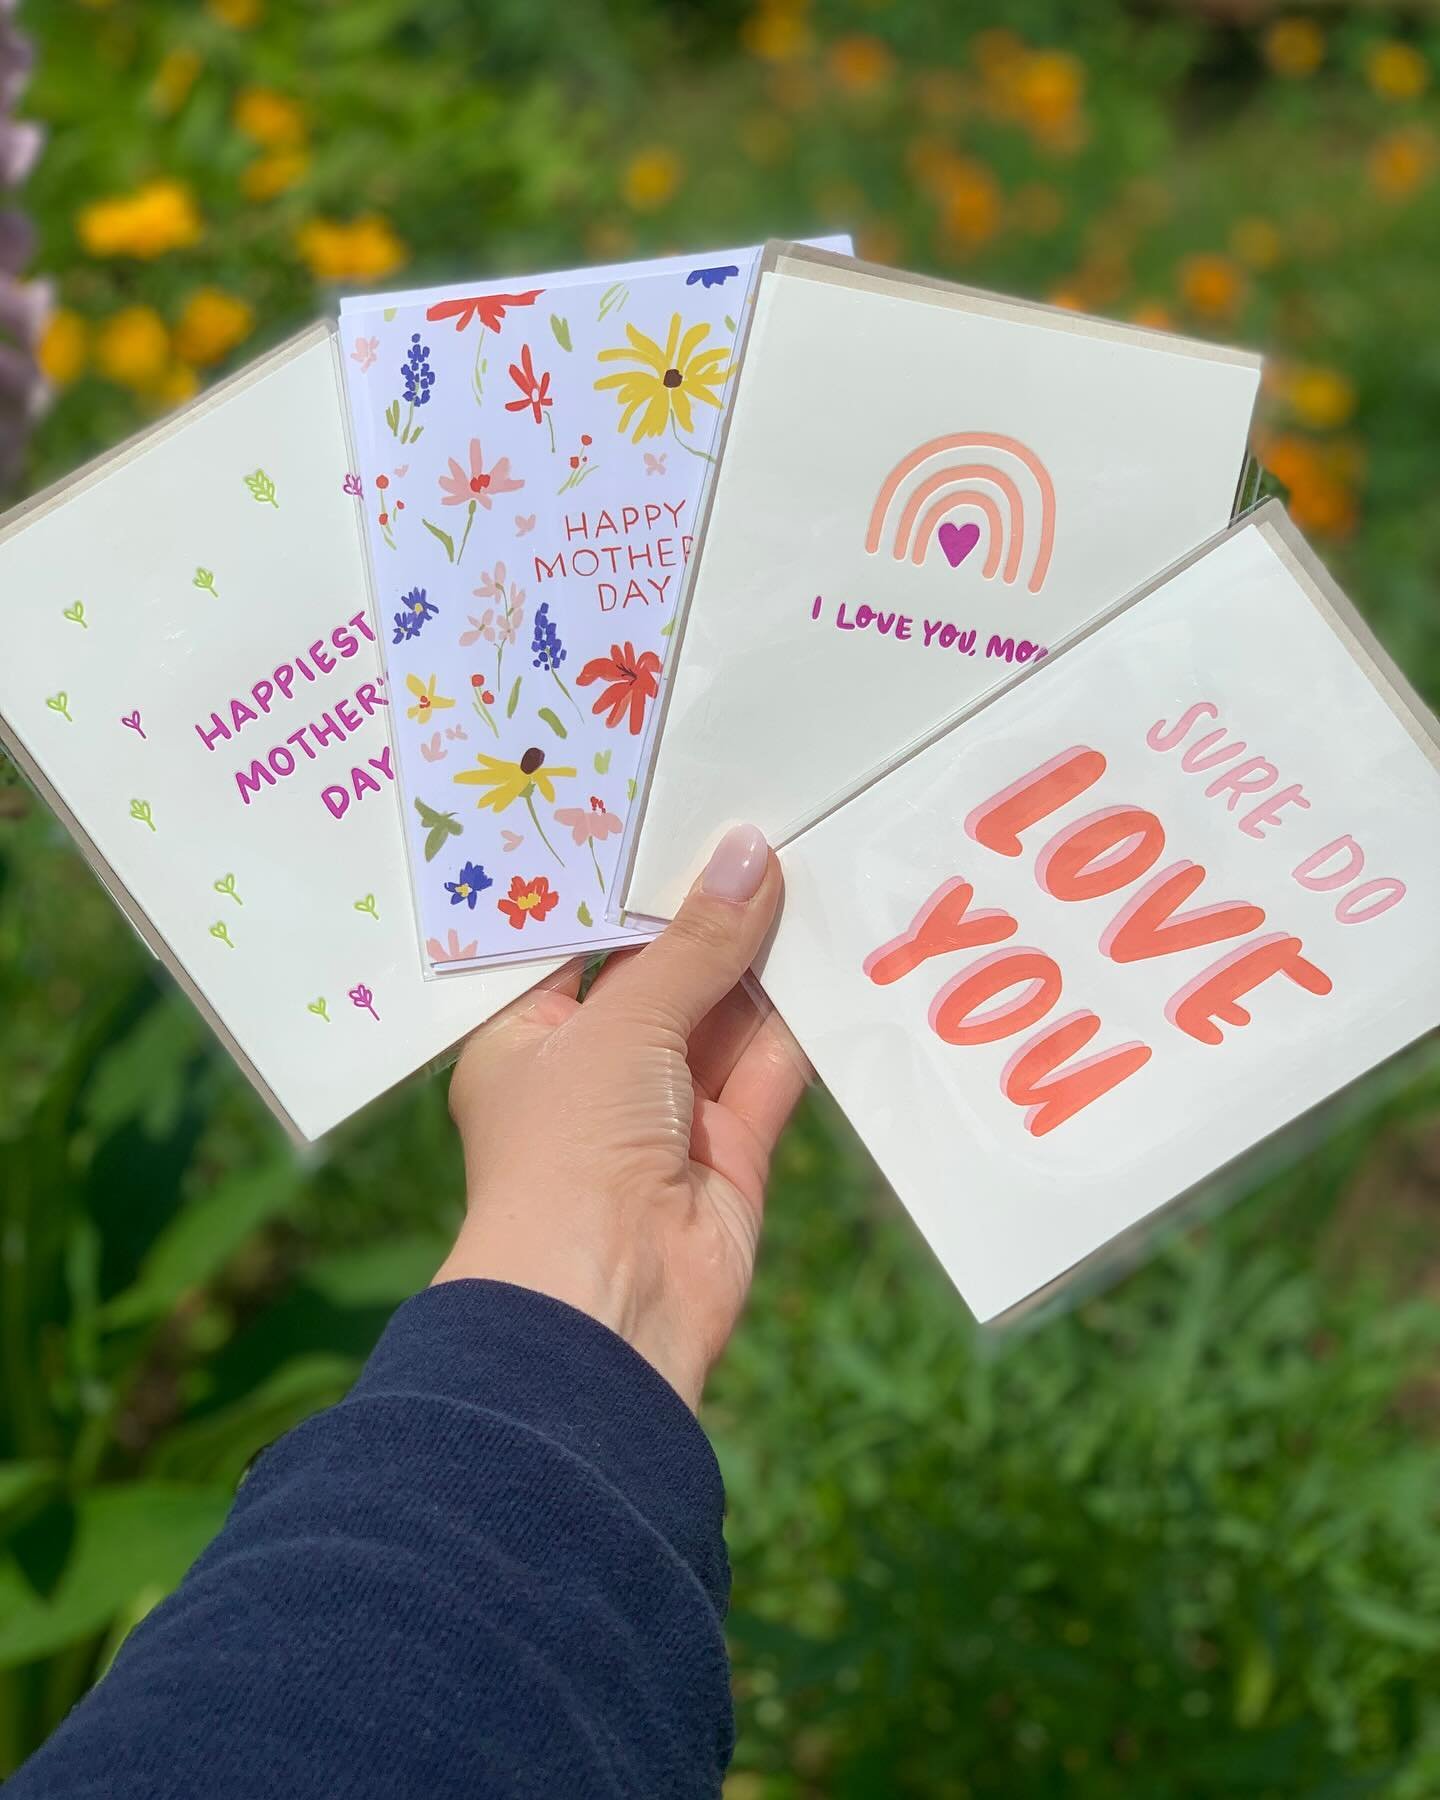 Mother&rsquo;s Day is right around the corner! You better start thinking of the contents for your heartfelt card now. Nothing less than Shakespeare will do for Mom.